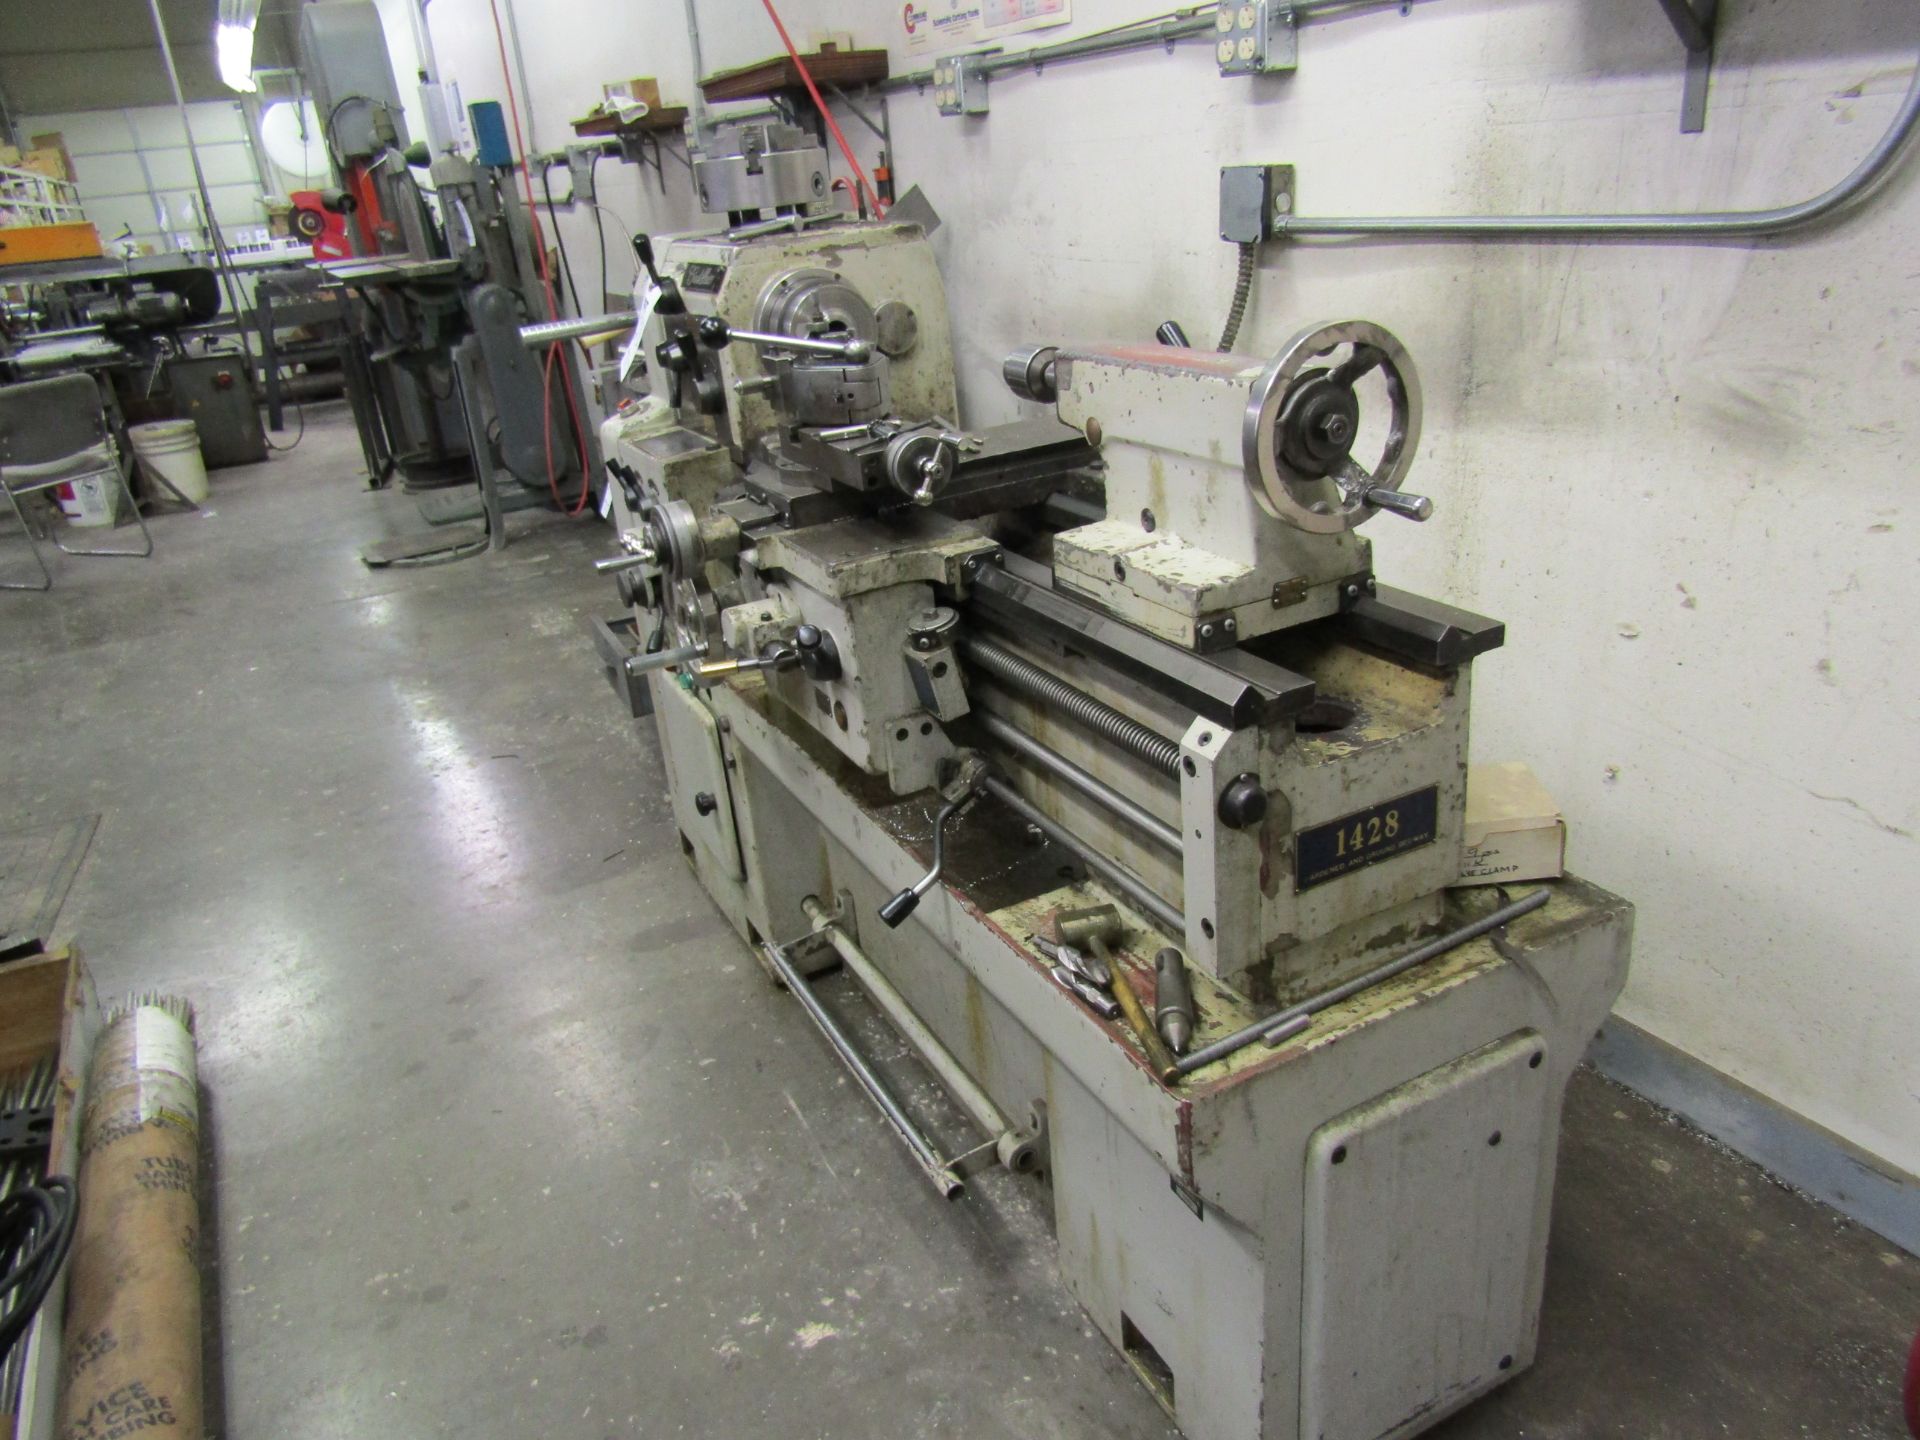 CADILLAC LATHE 14"x28" HARDENED BED WAY, COLLET CLOSER ATTACHEMENT, 6" 3 JAW CHUCK, TAILSTOCK, - Image 2 of 5